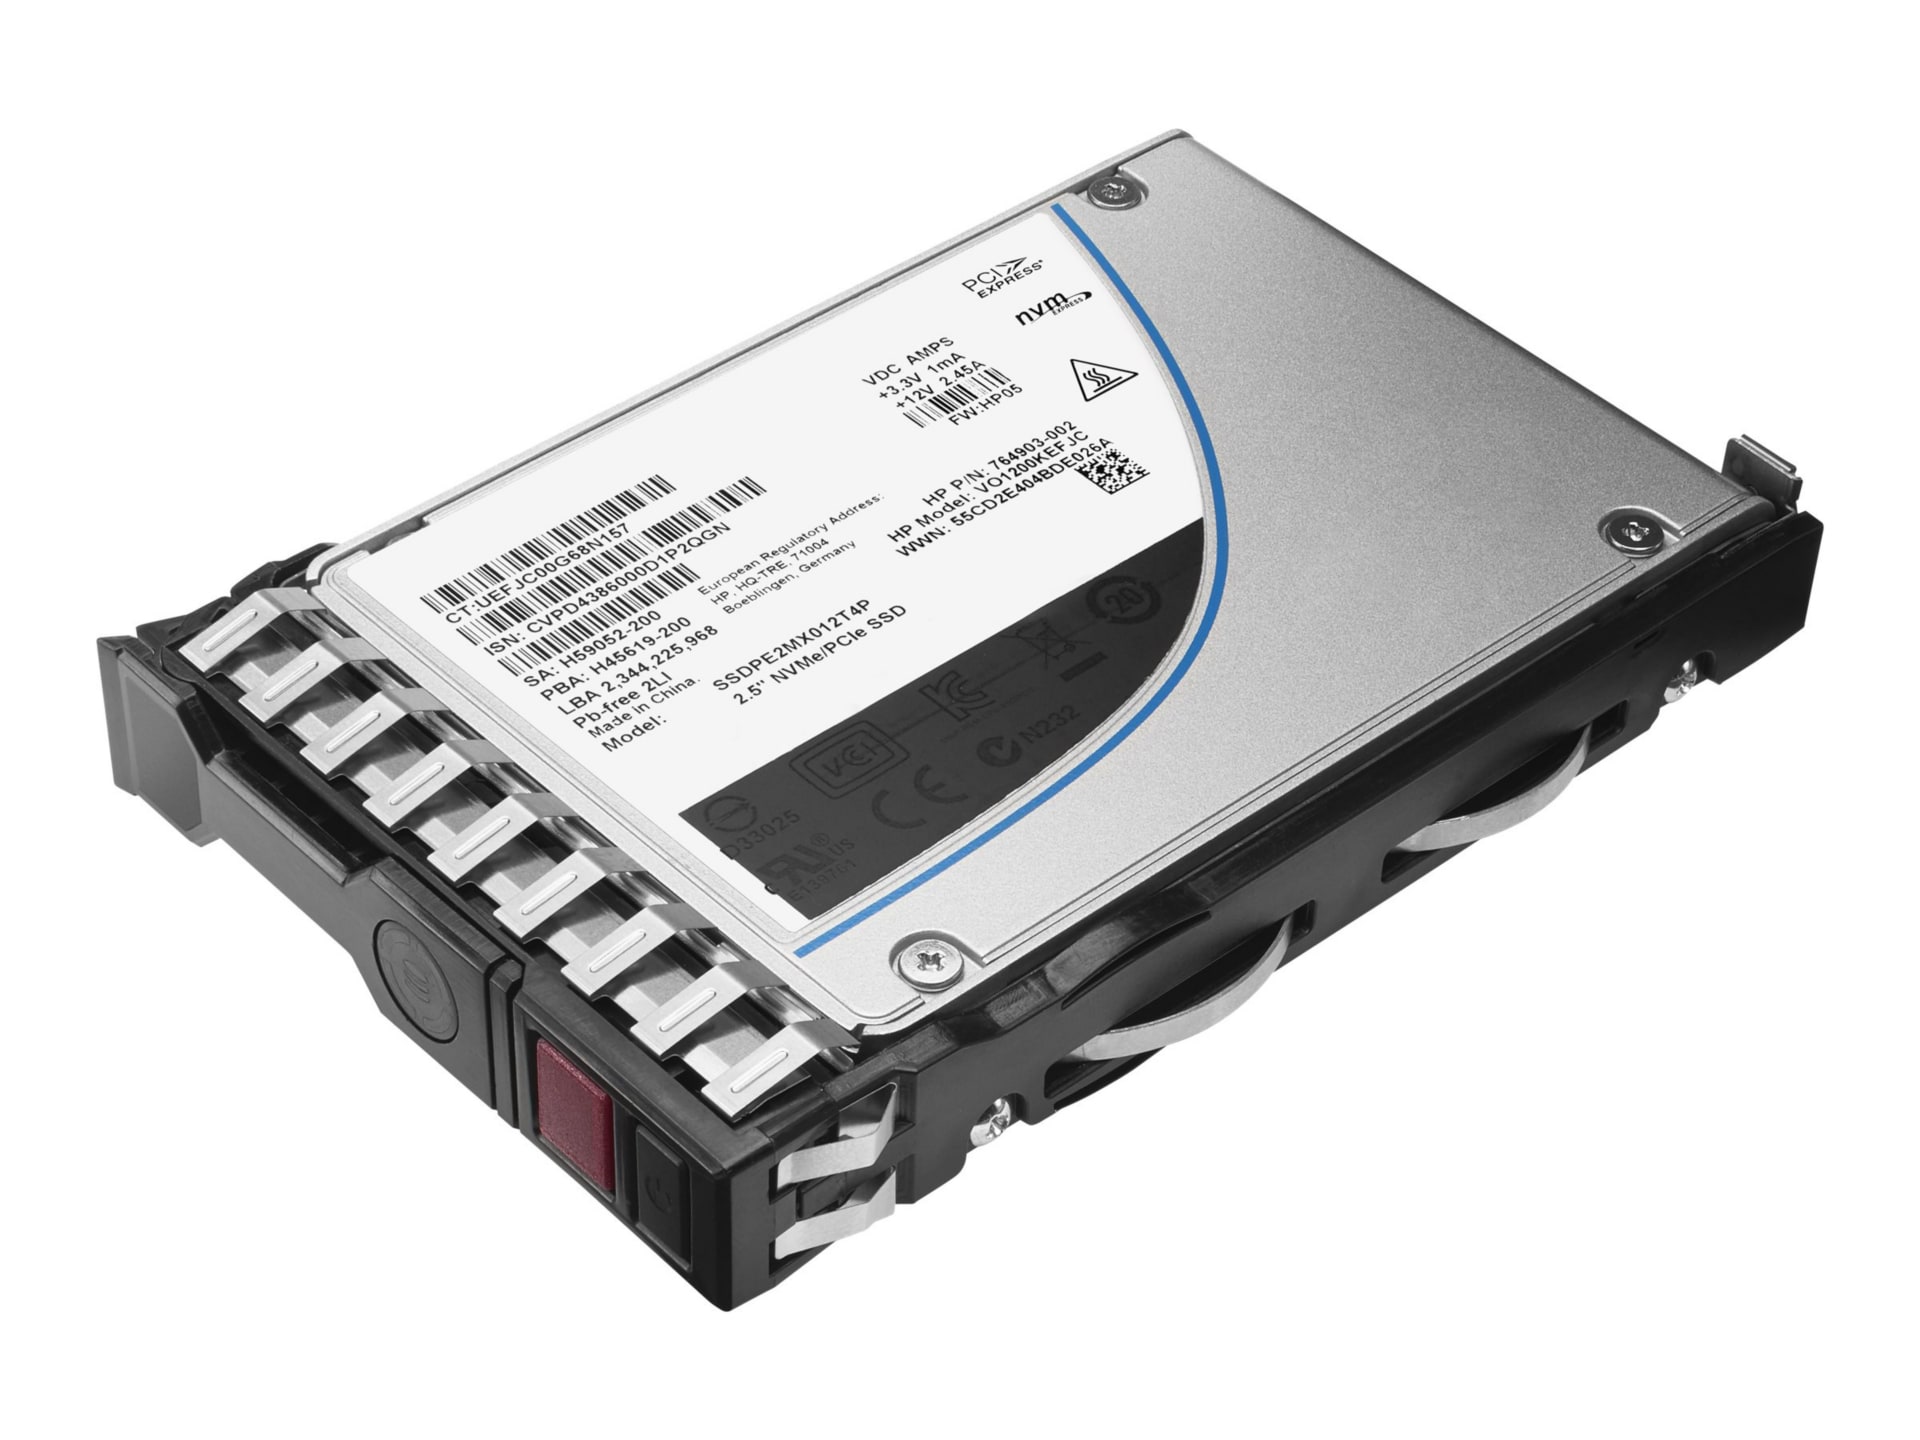 HPE Mixed Use-3 - solid state drive - 480 GB - SATA 6Gb/s